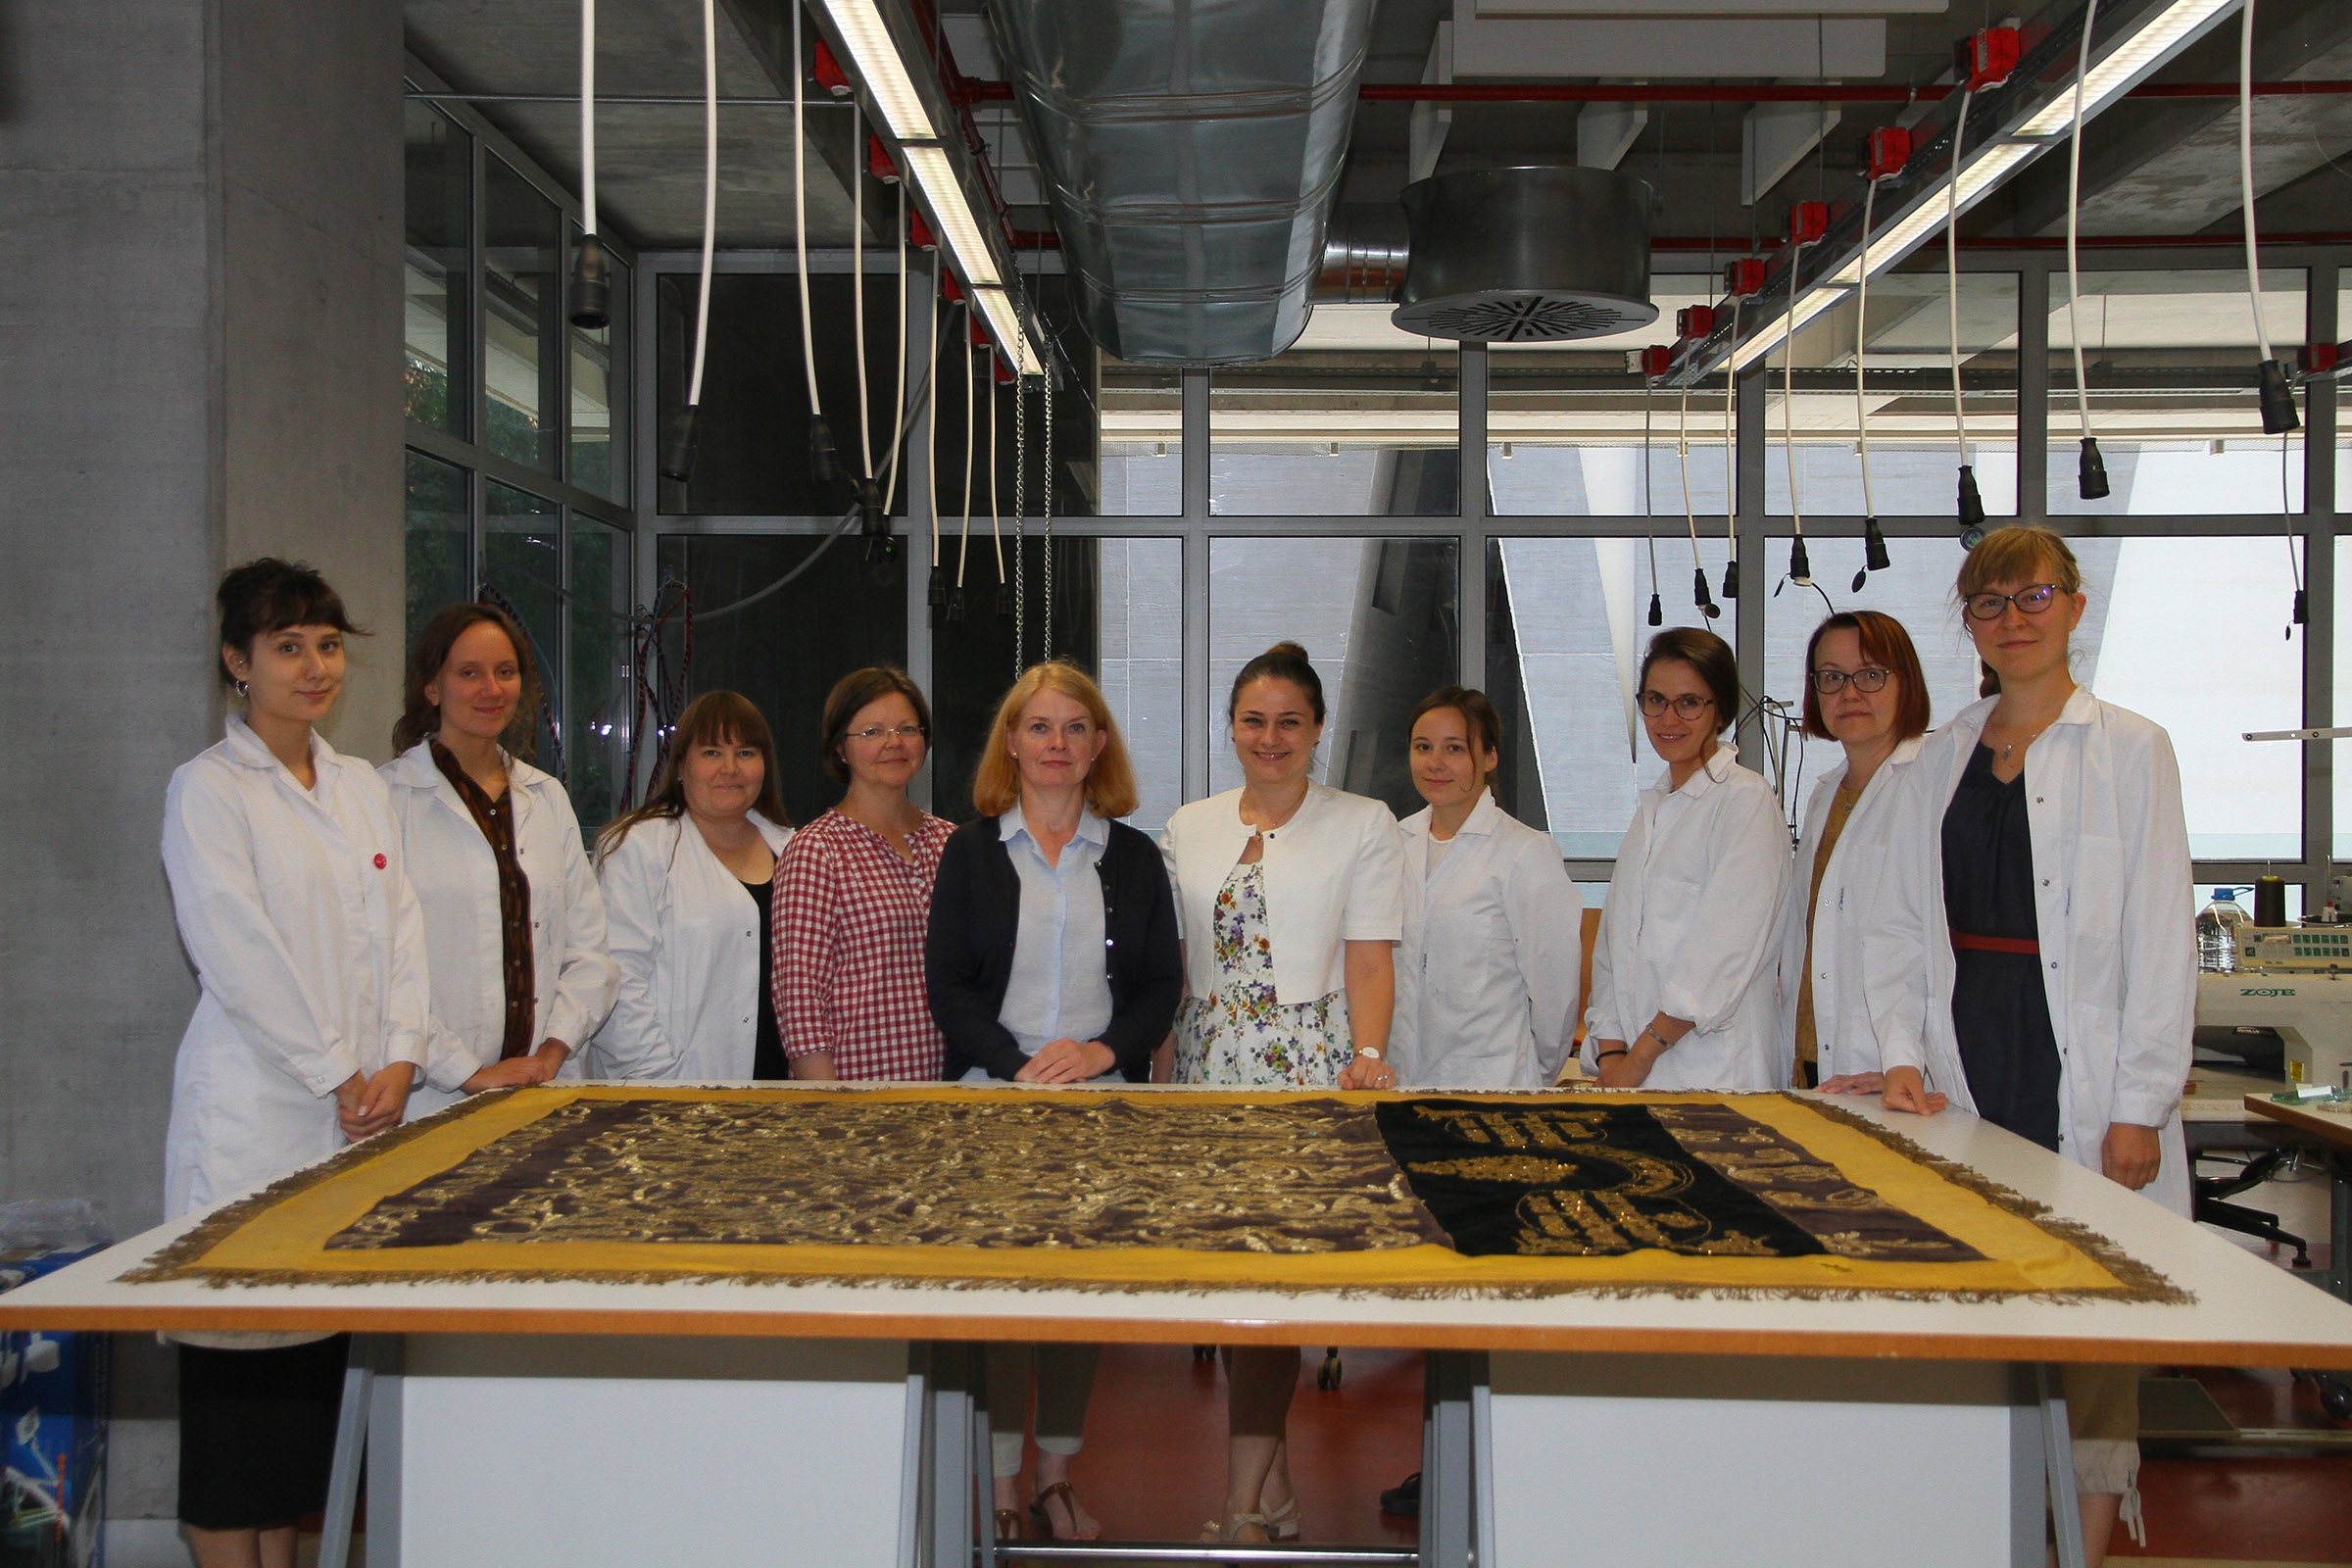 CONSERVATION AND PRESERVATION OF HEIRLOOM TEXTILES 